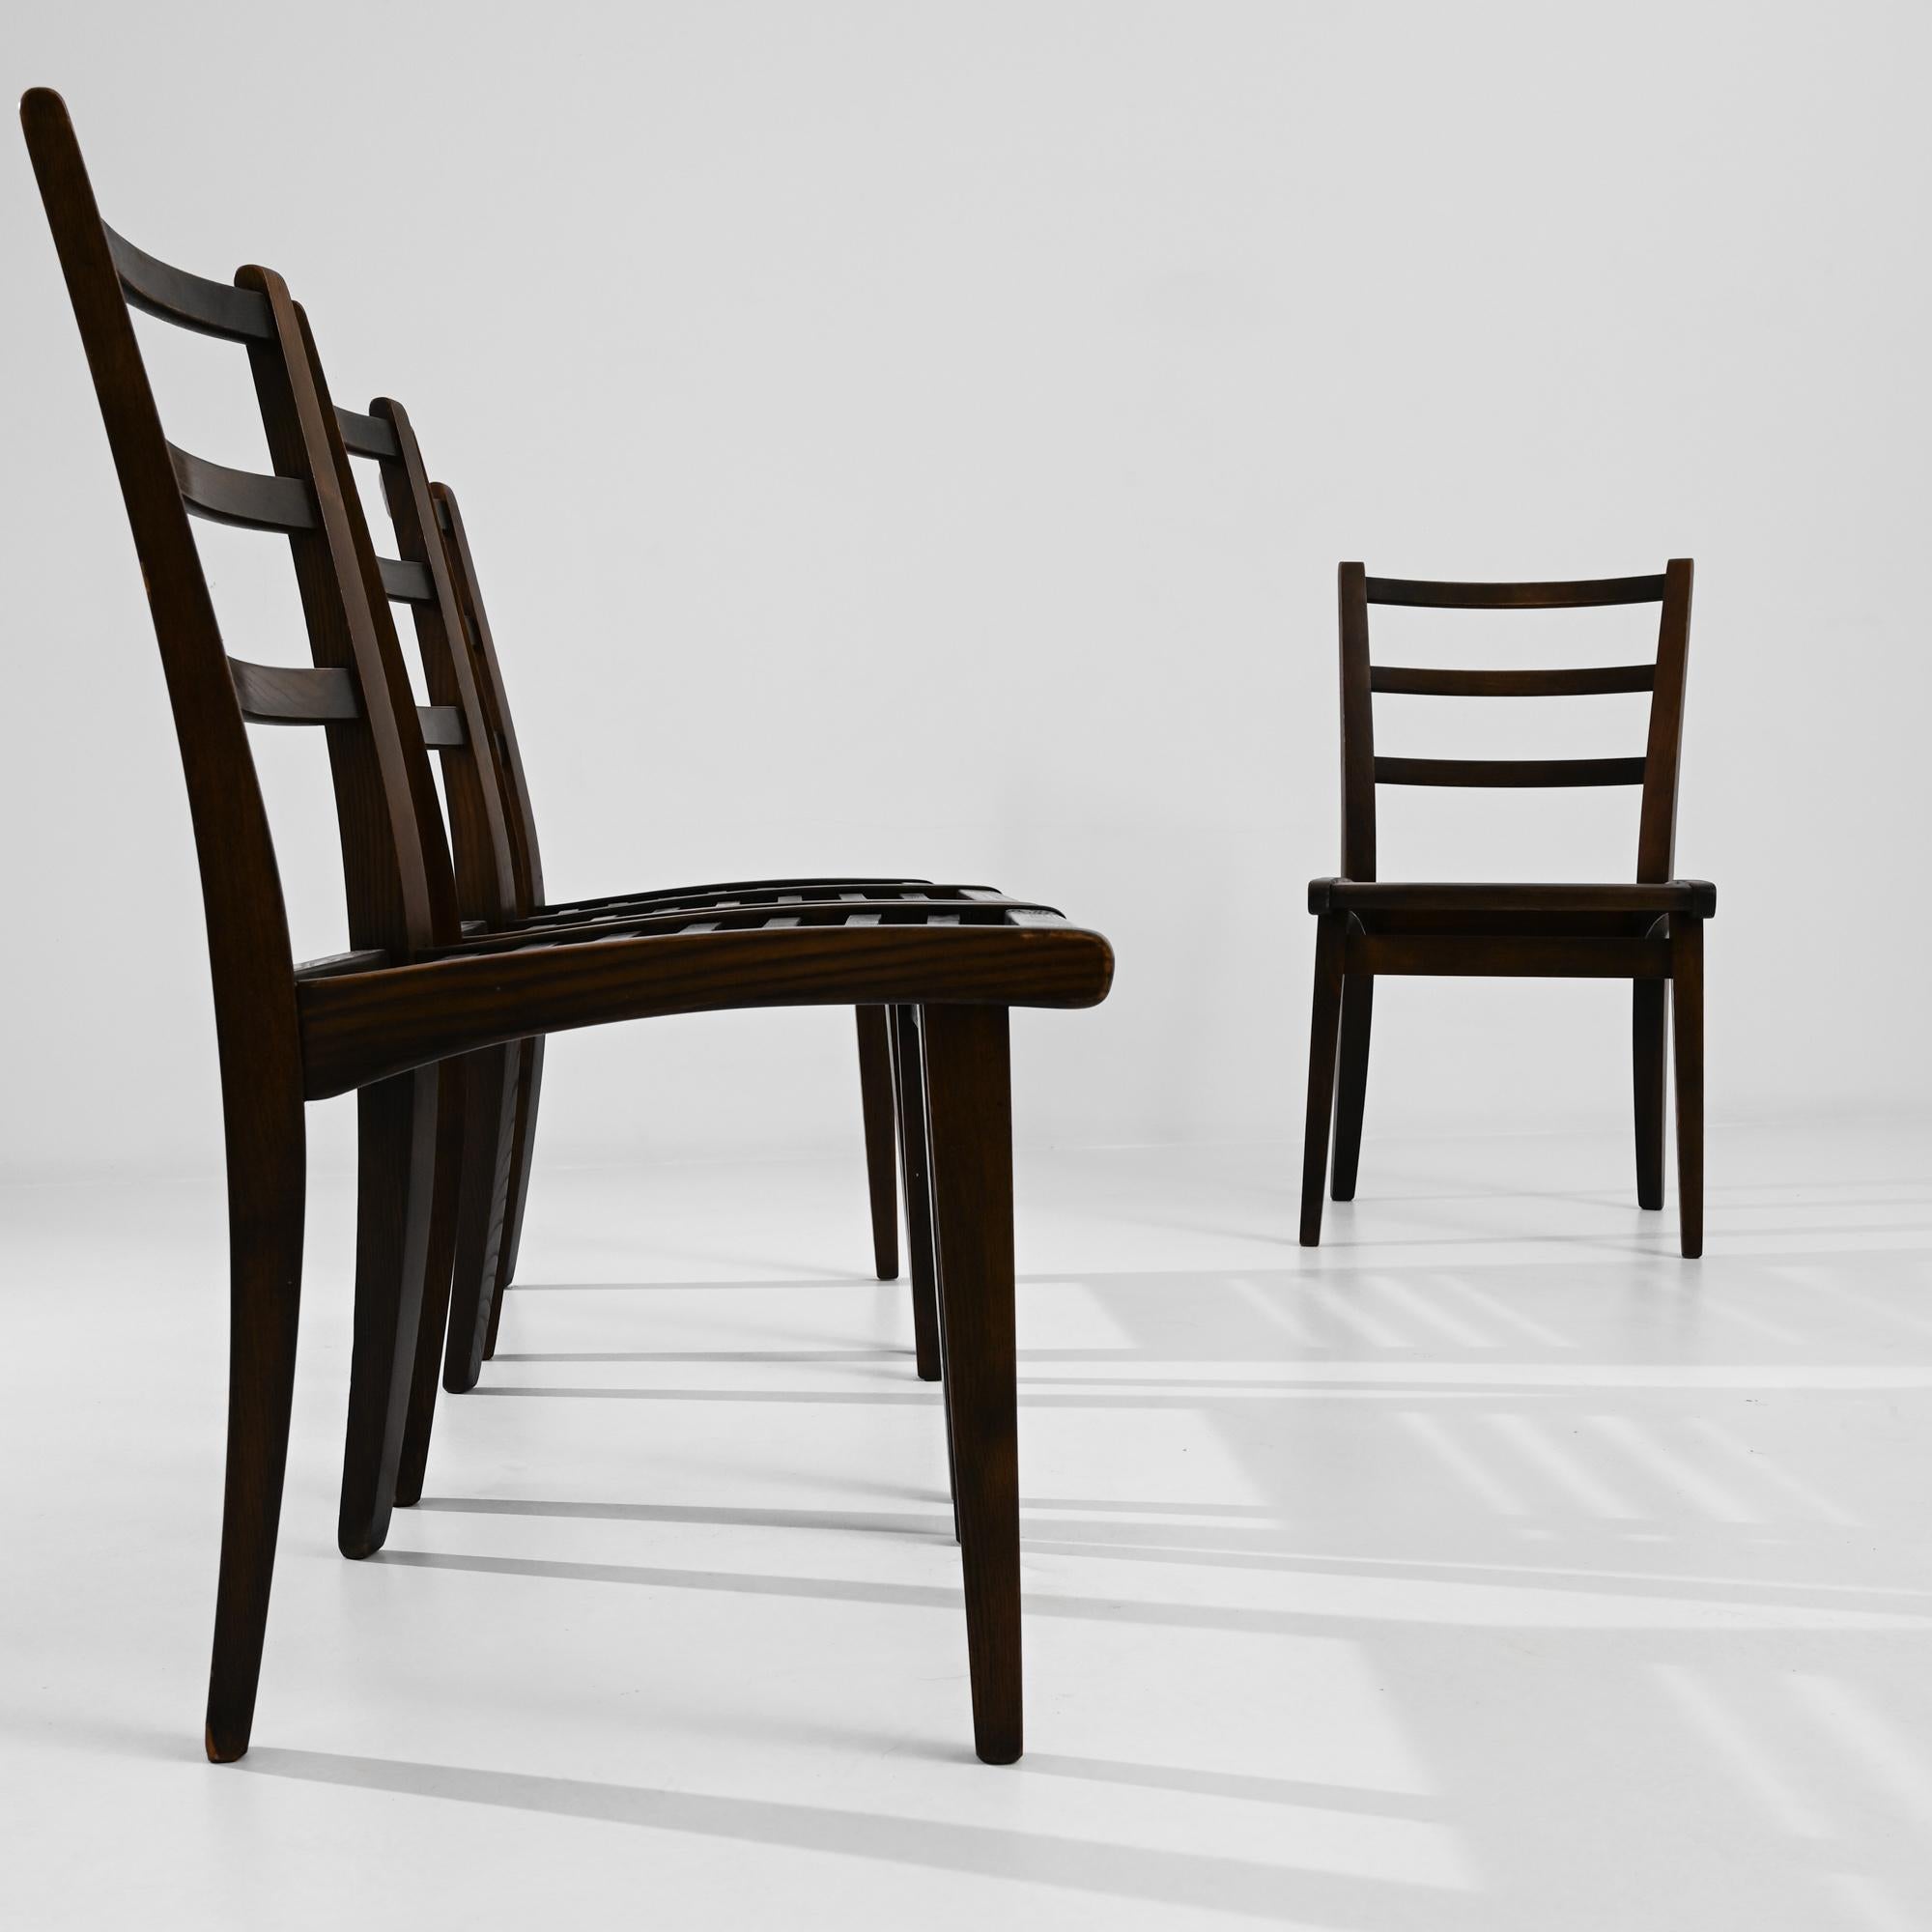 20th Century Czech Wooden Chairs, Set of Four For Sale 1